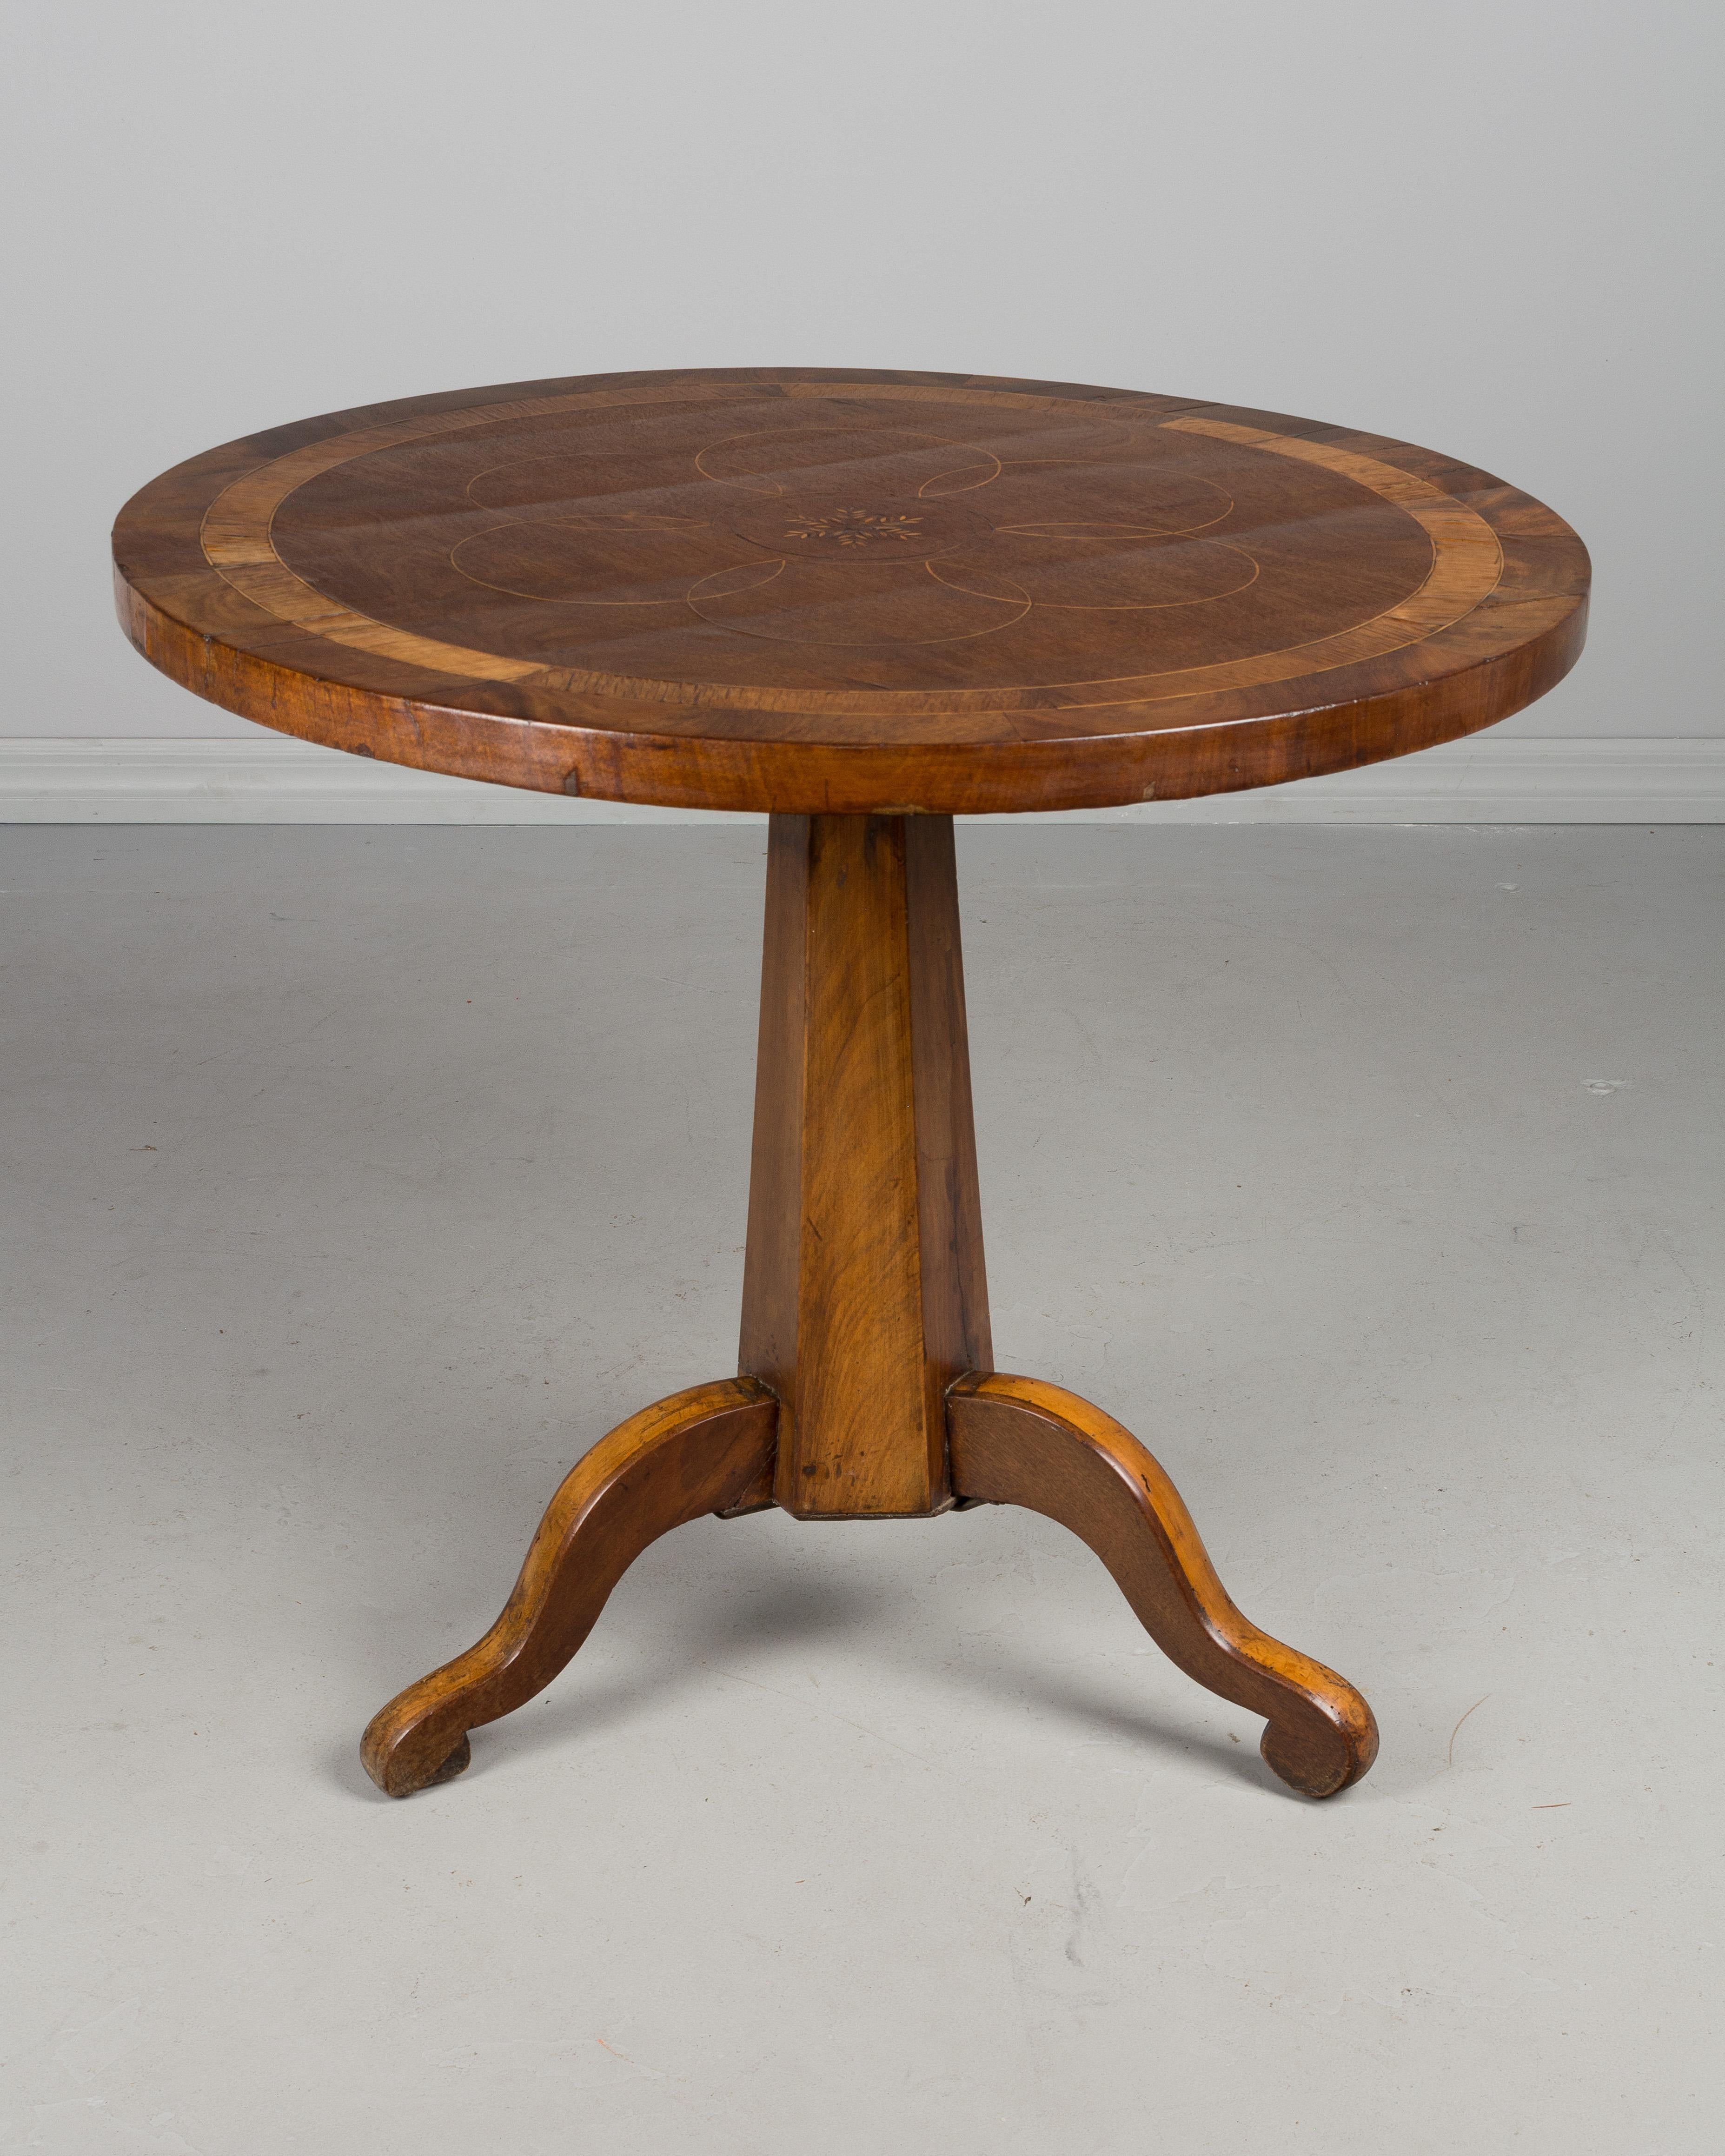 A 19th century Country French gueridon, or circular side table with a marquetry top of inlaid walnut veneer and a solid walnut base with tripod legs. The legs were reinforced with iron on the underside at a later date and the table is sturdy.